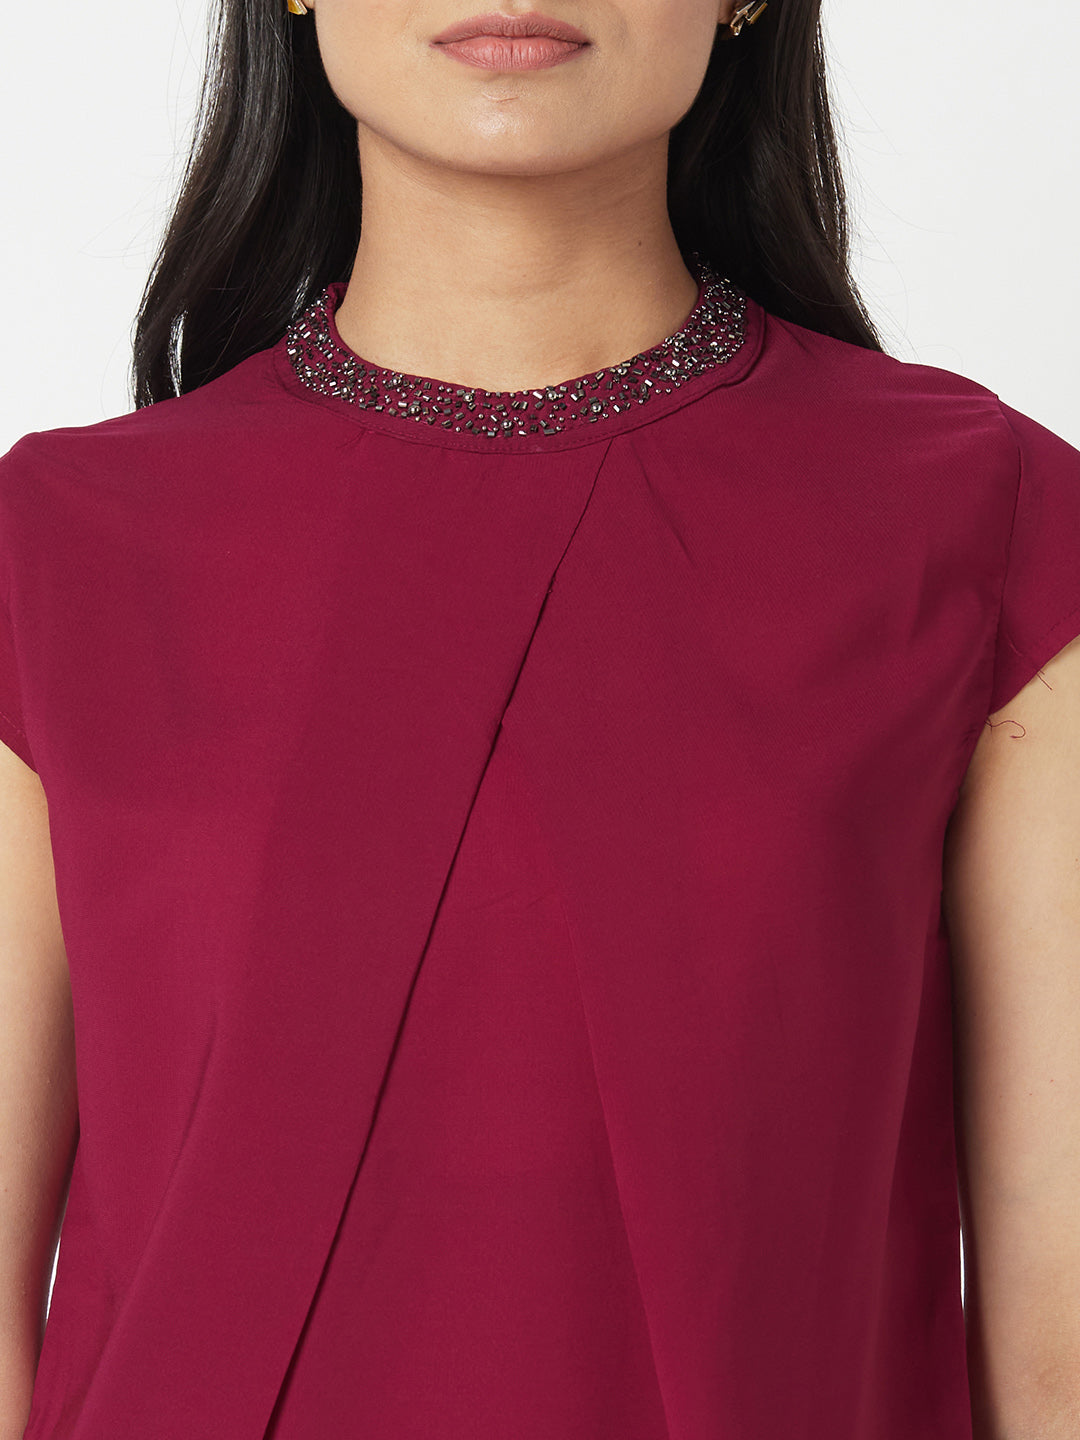 Fuchsia Round Neck hand Embroidered Formal Top